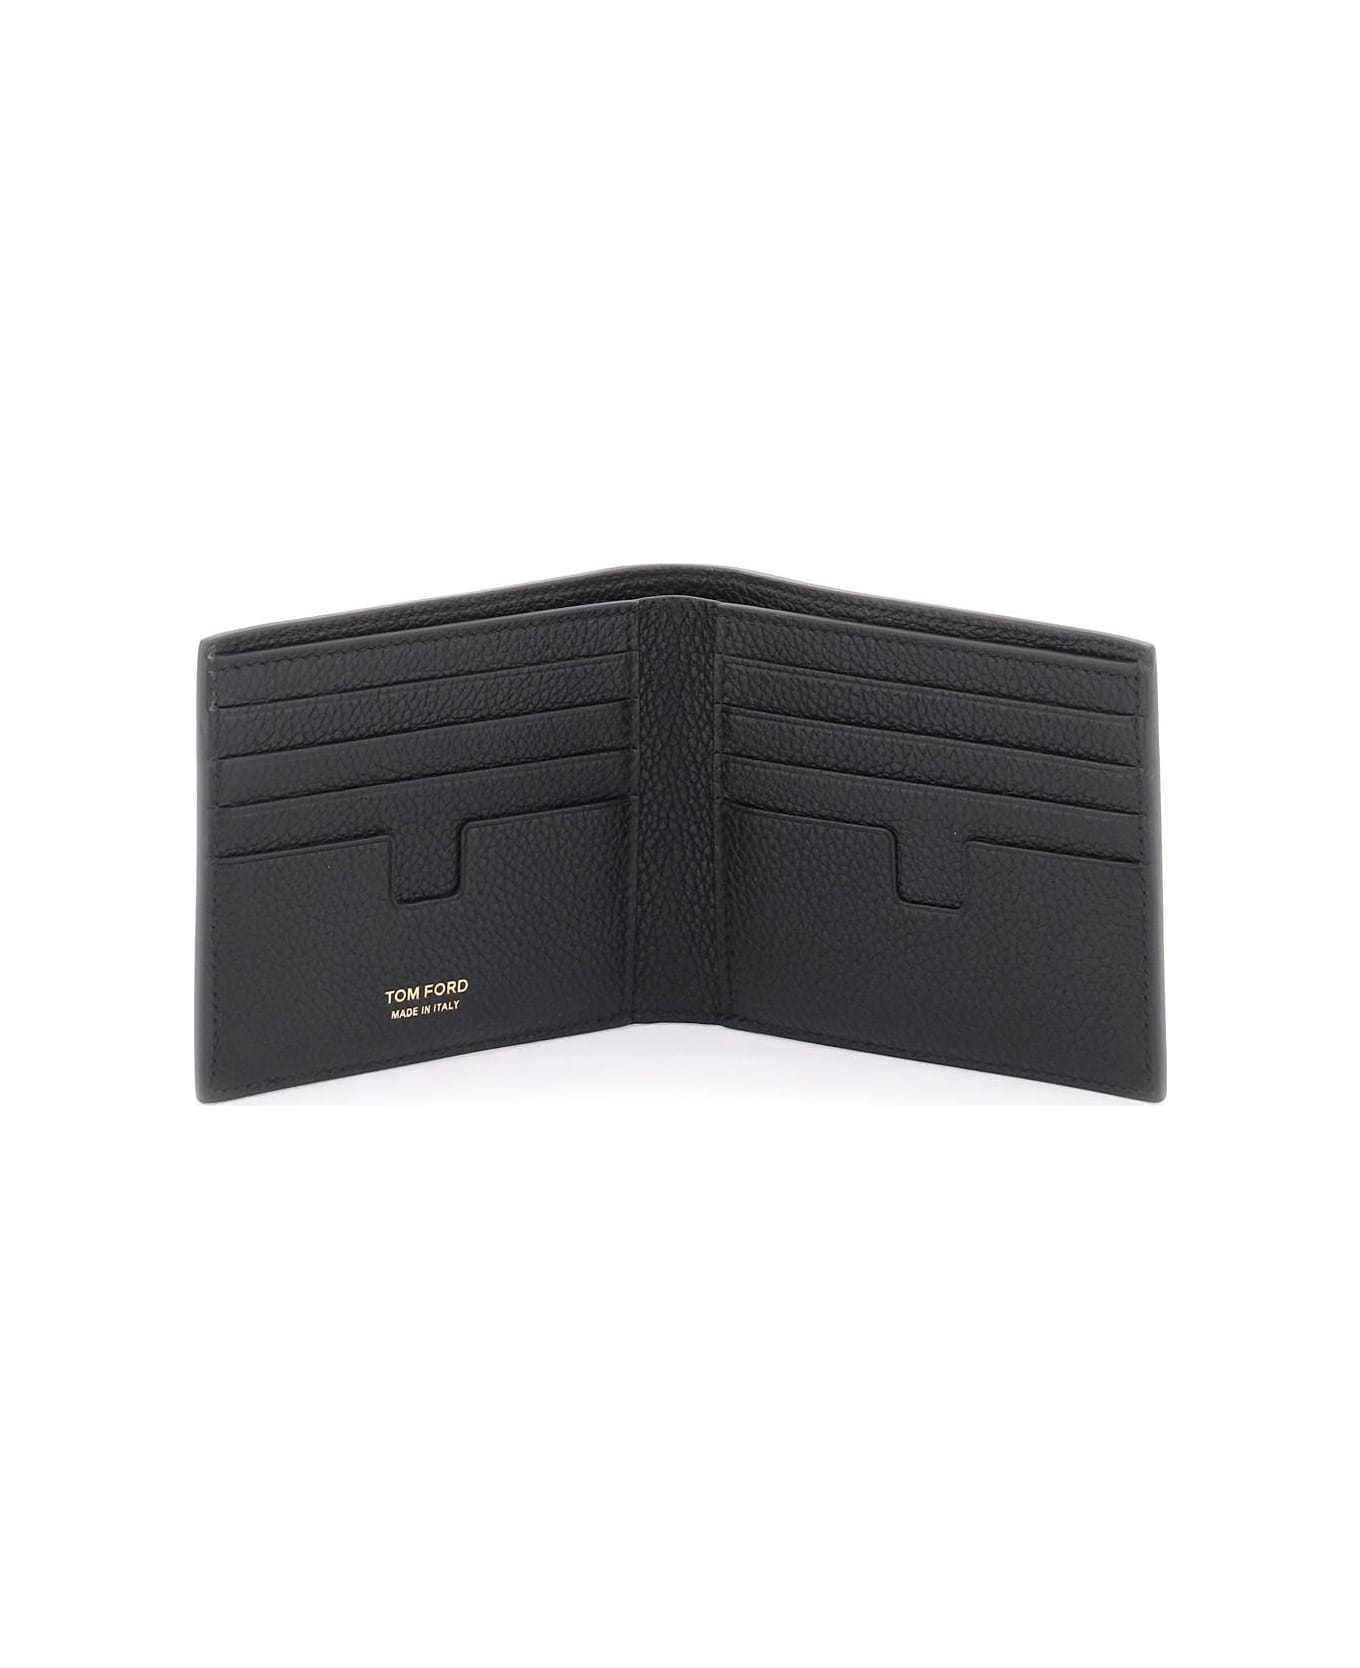 Tom Ford Leather Flap-over Wallet - black 財布